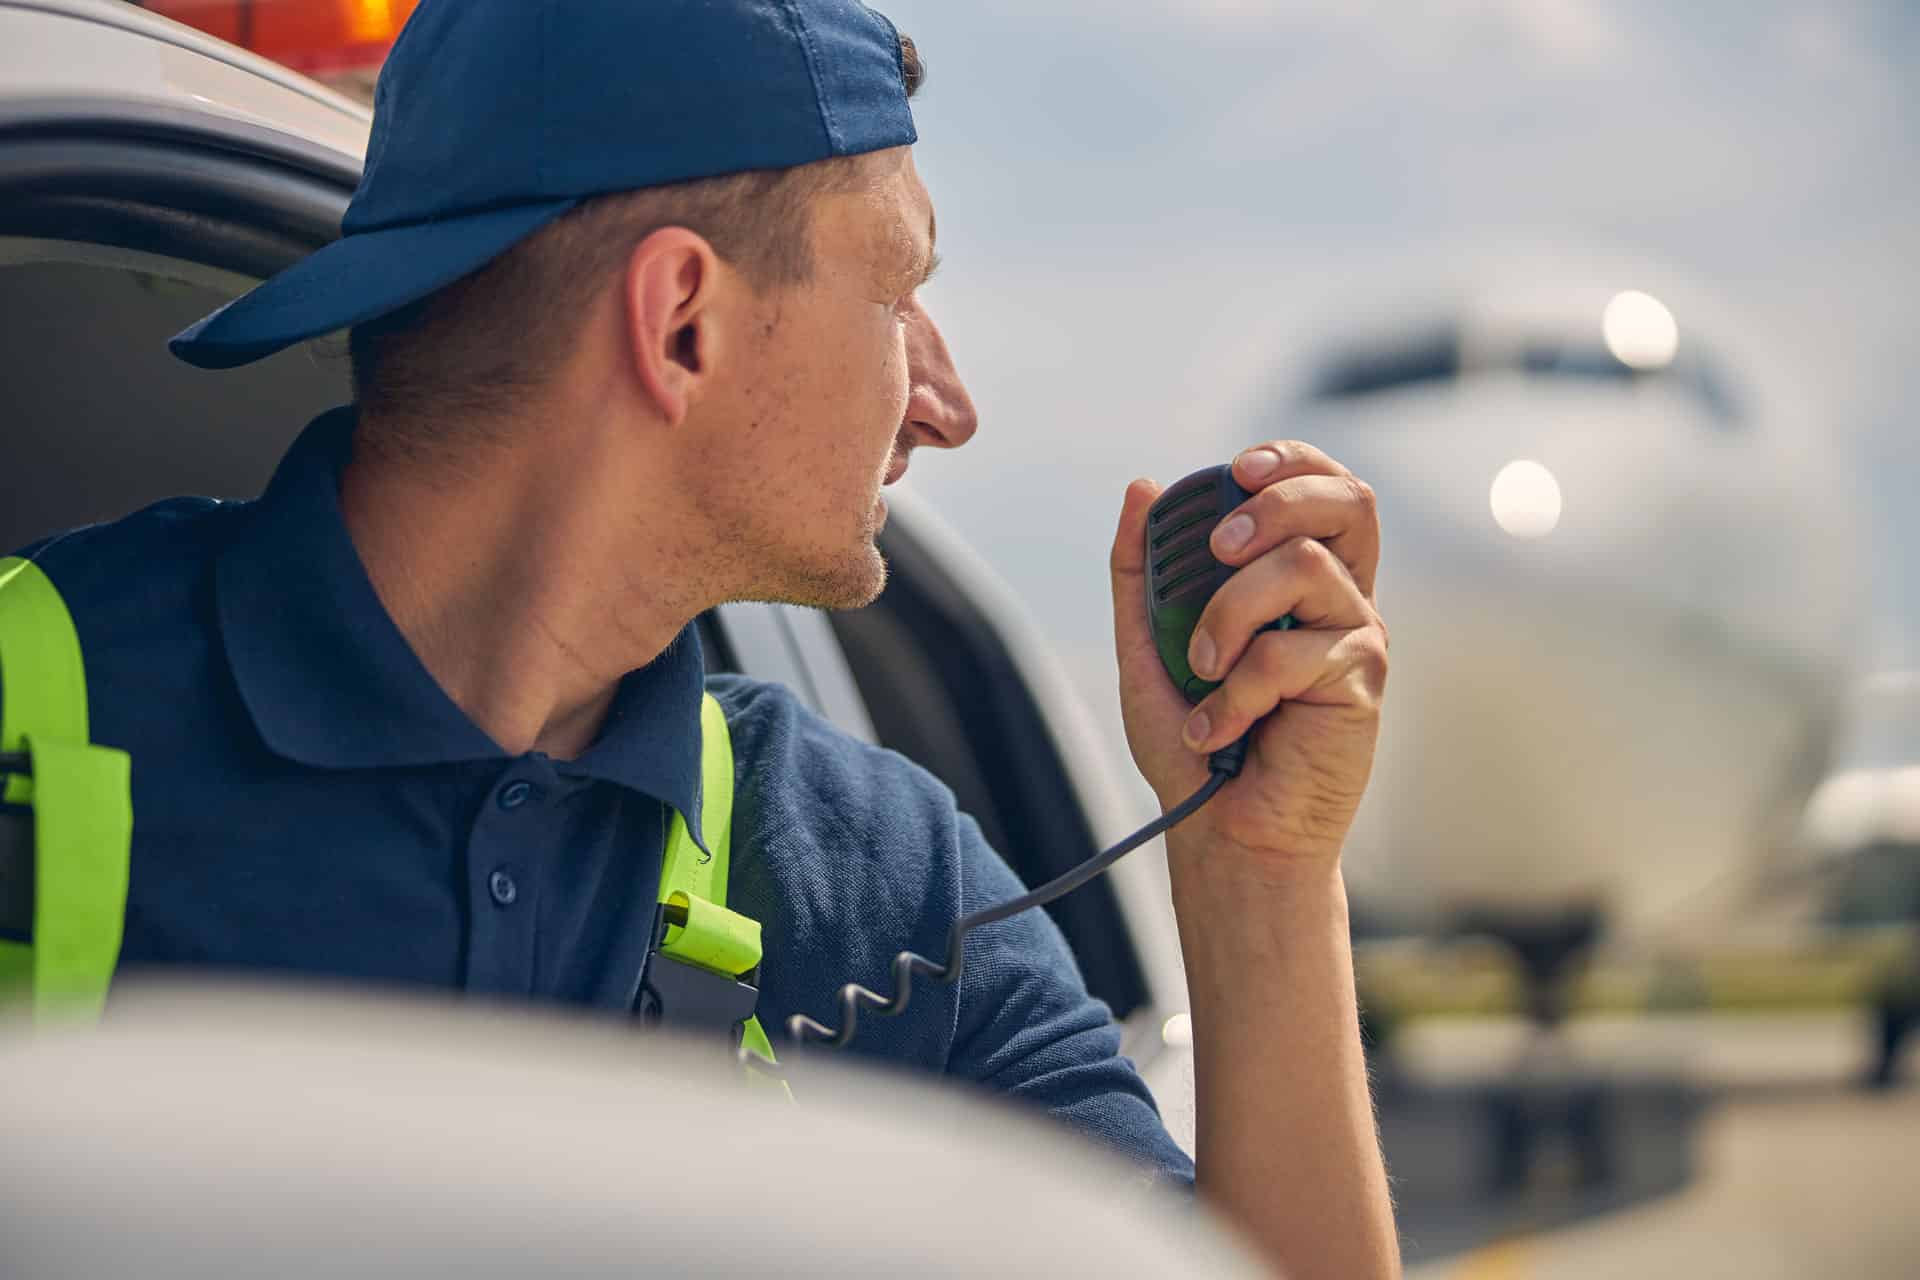 Close up portrait of a professional ground vehicle operator with a microphone in his hand looking away